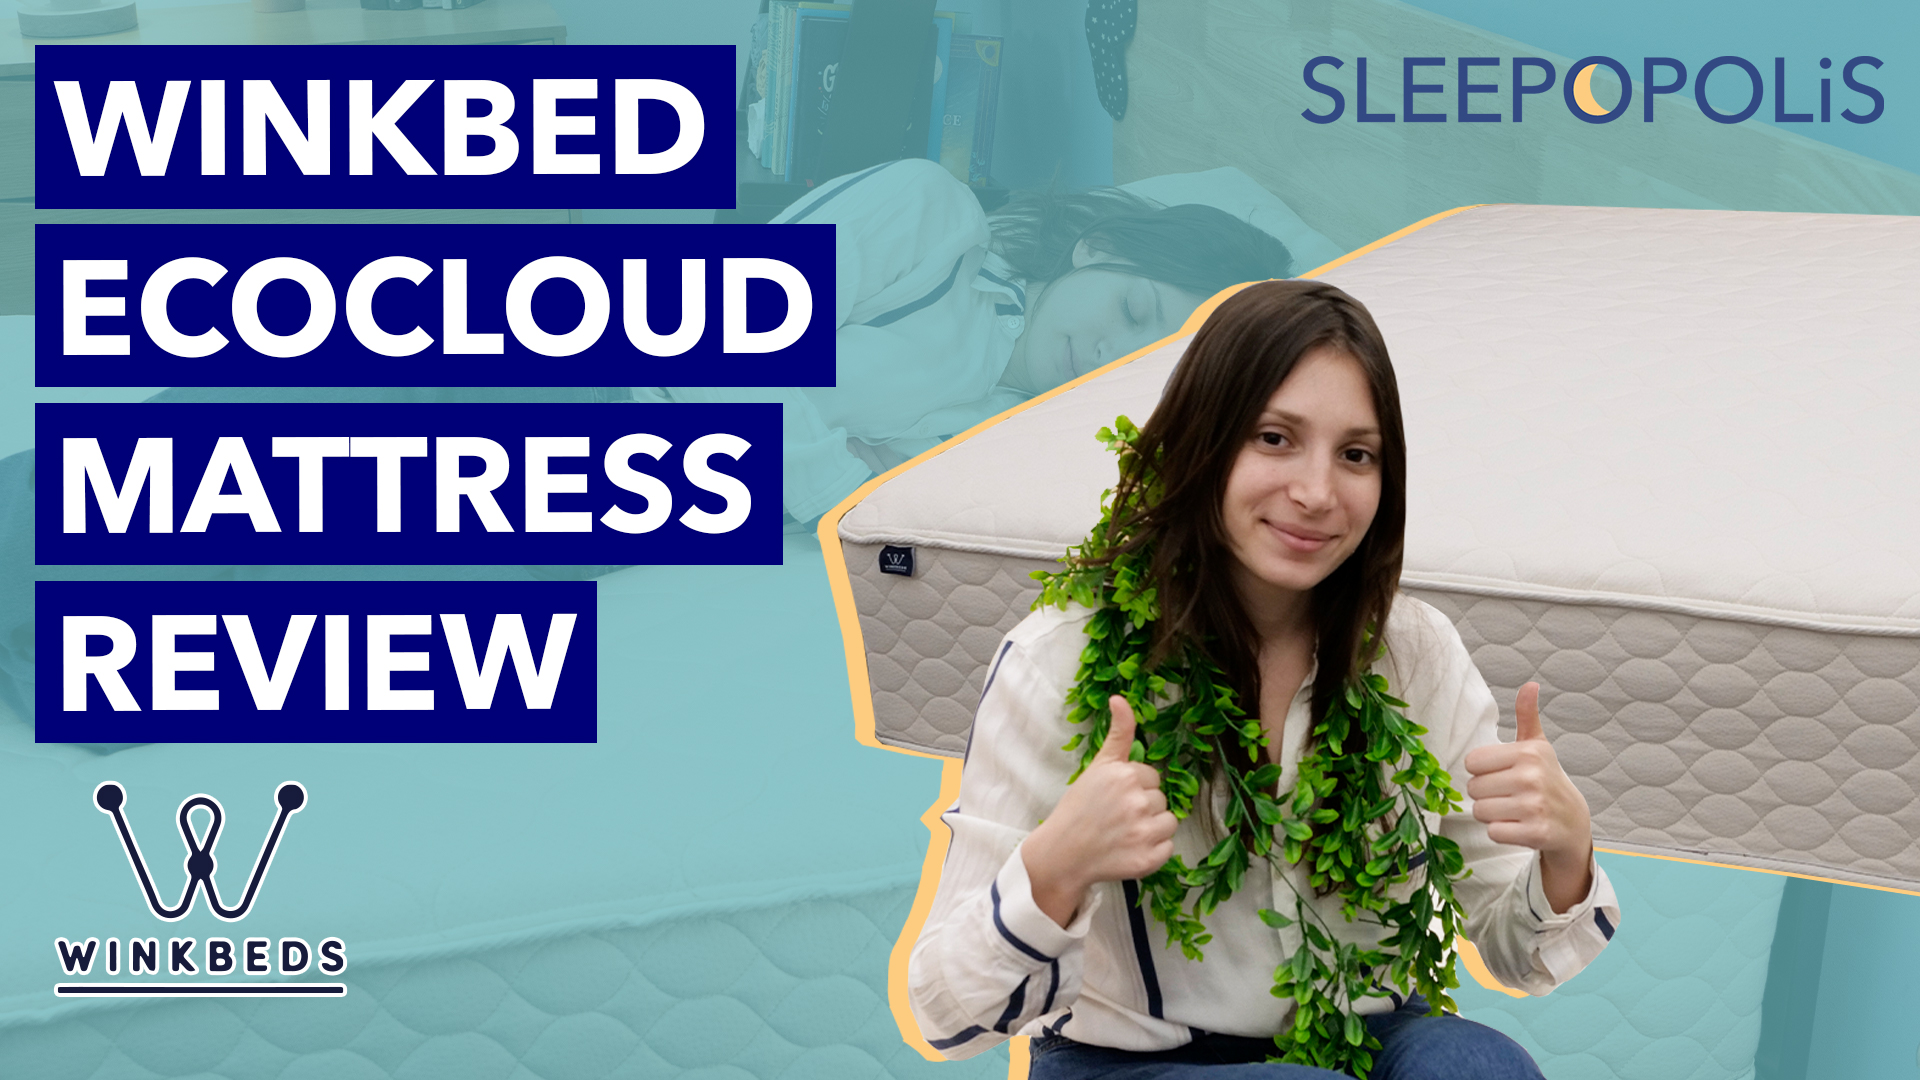 winkbed ecocloud mattress reviews